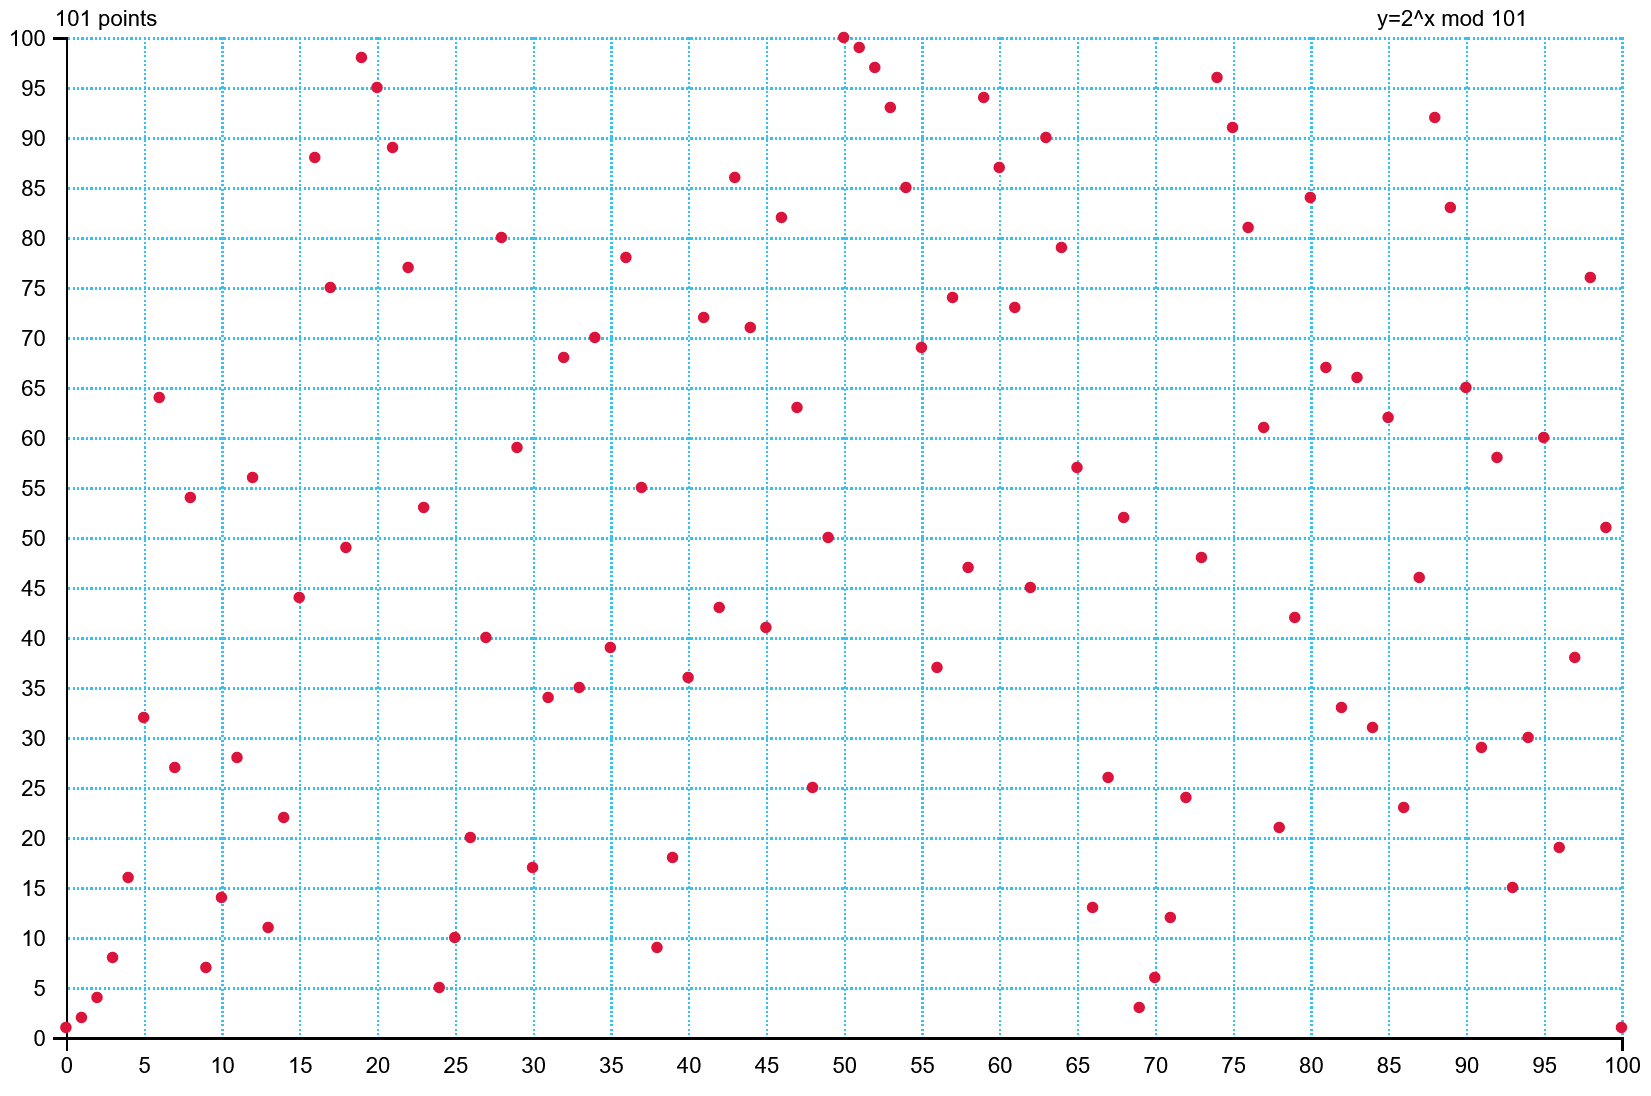 The graph of exponentiation with basis 2 over \mathbb{Z} / 101 \mathbb{Z} (Grau (2018b))